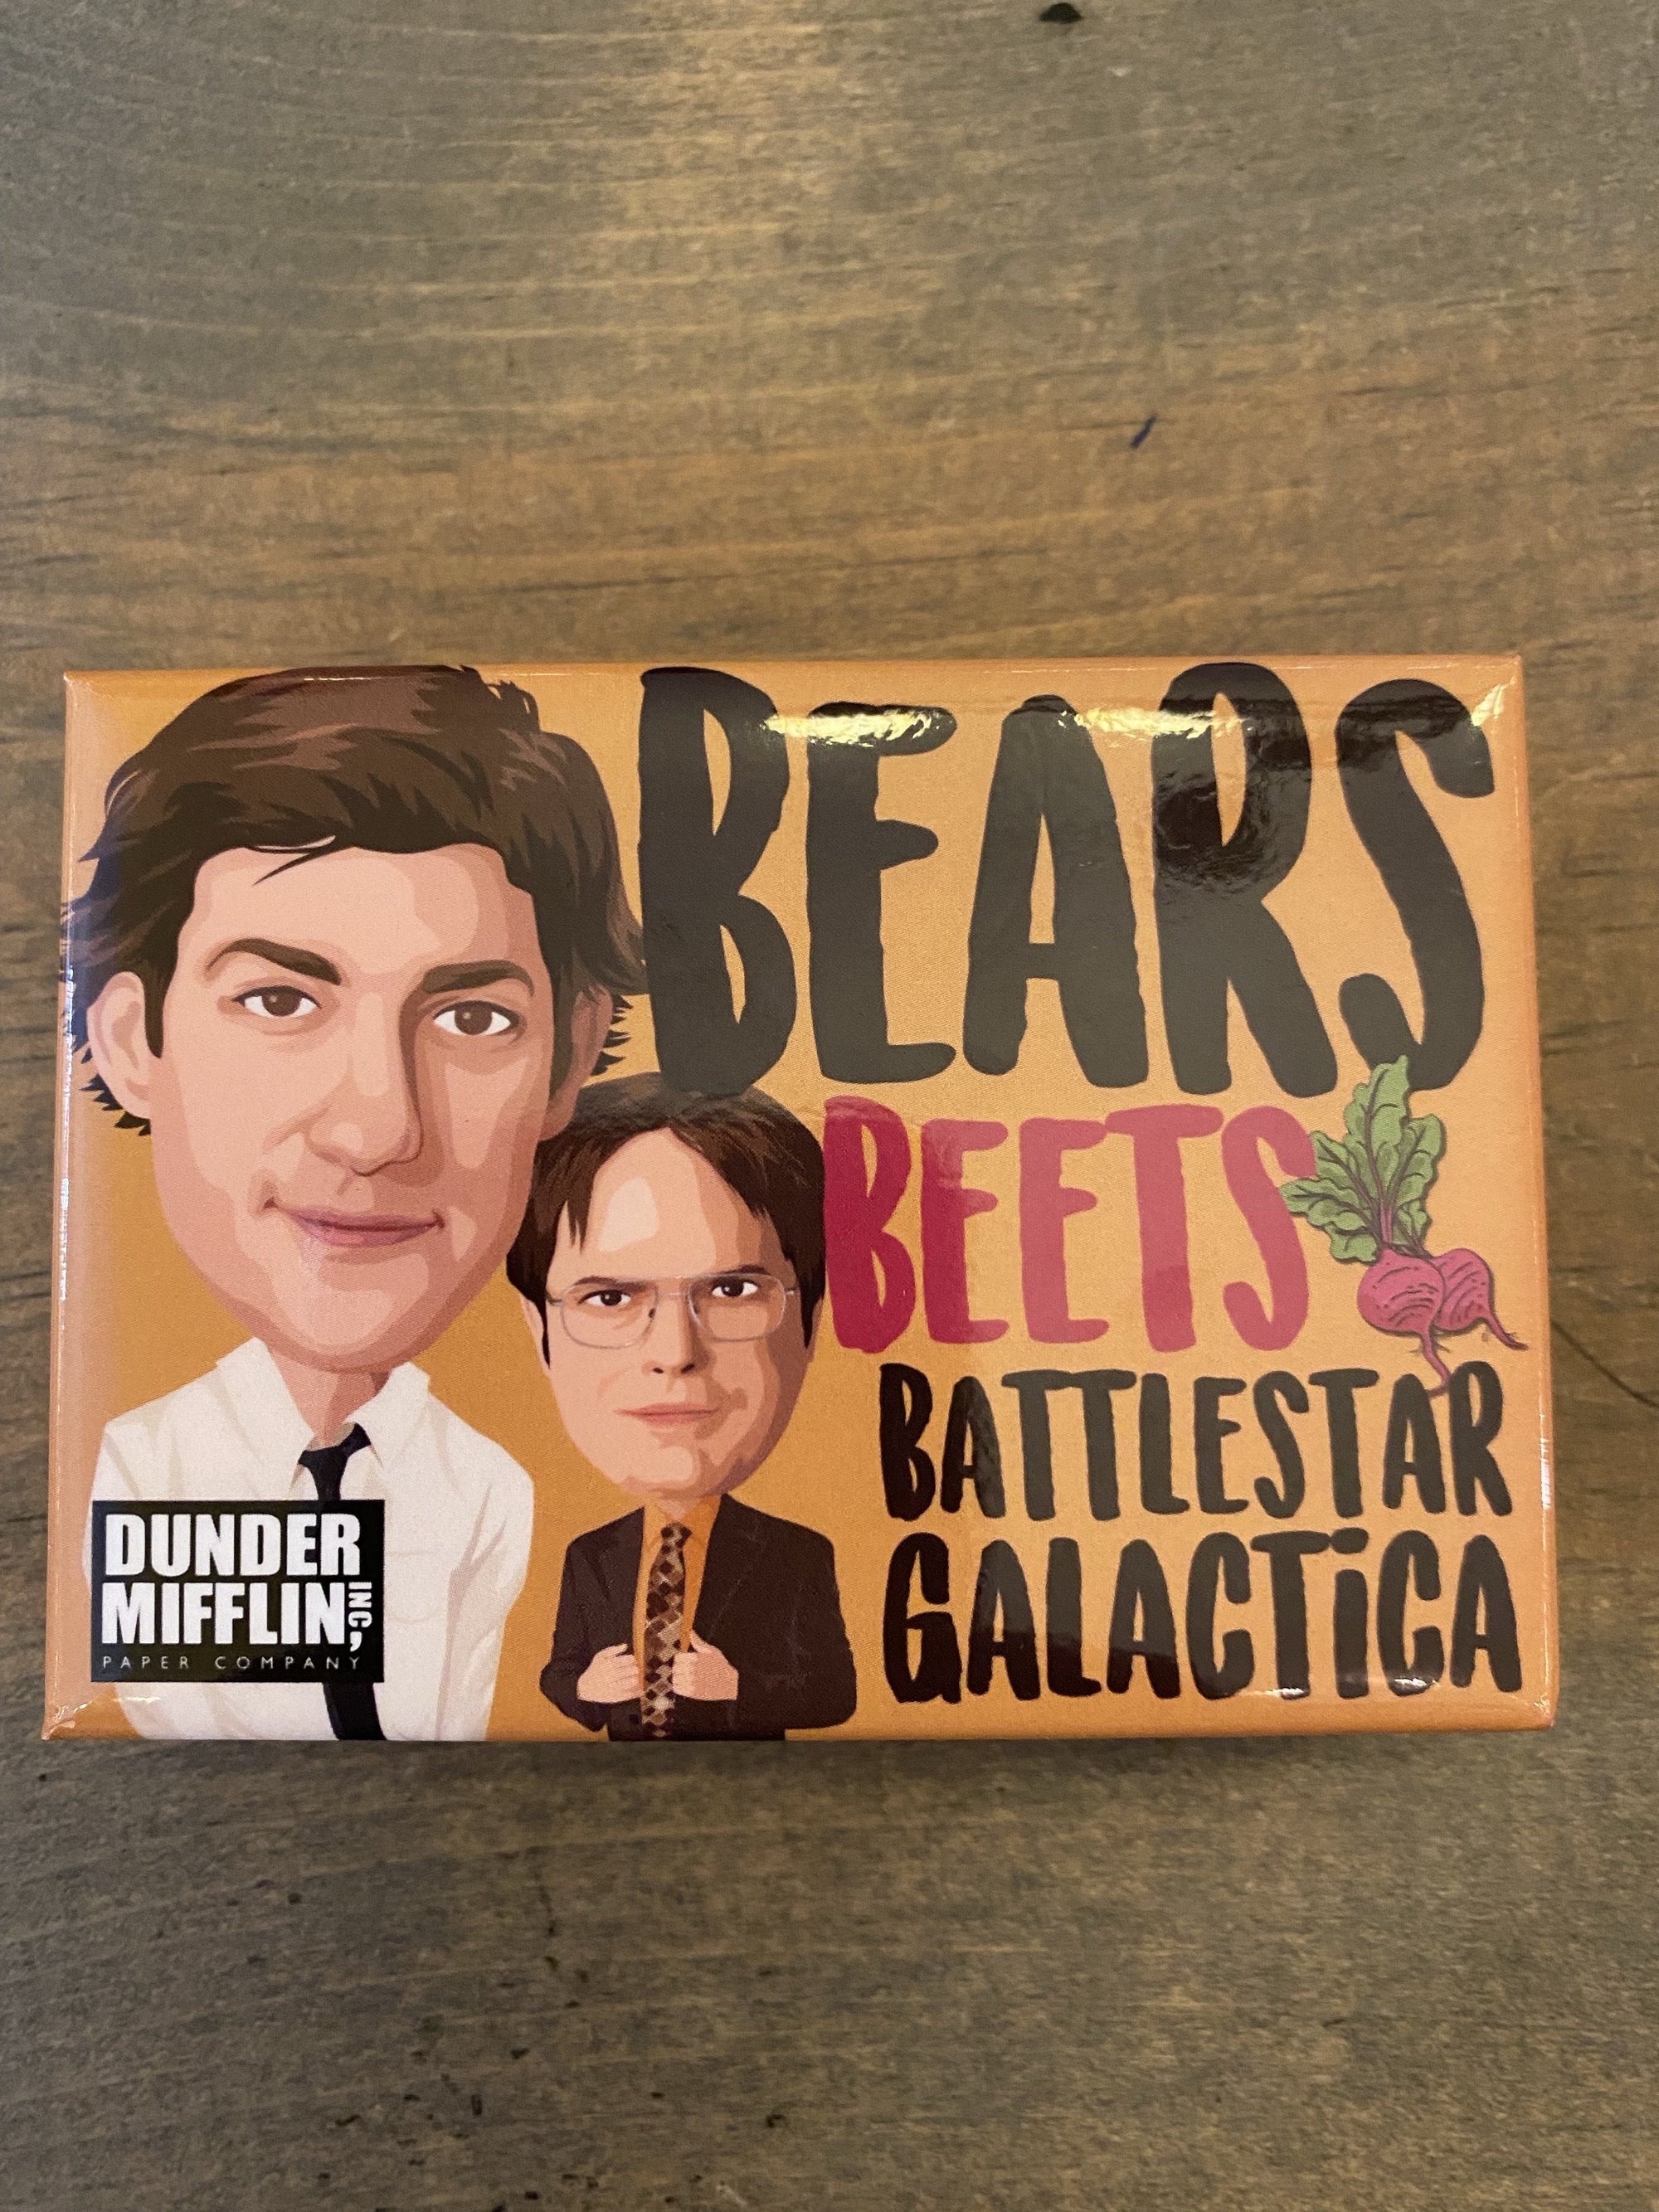 The Office: Dwight Shrute Magnet